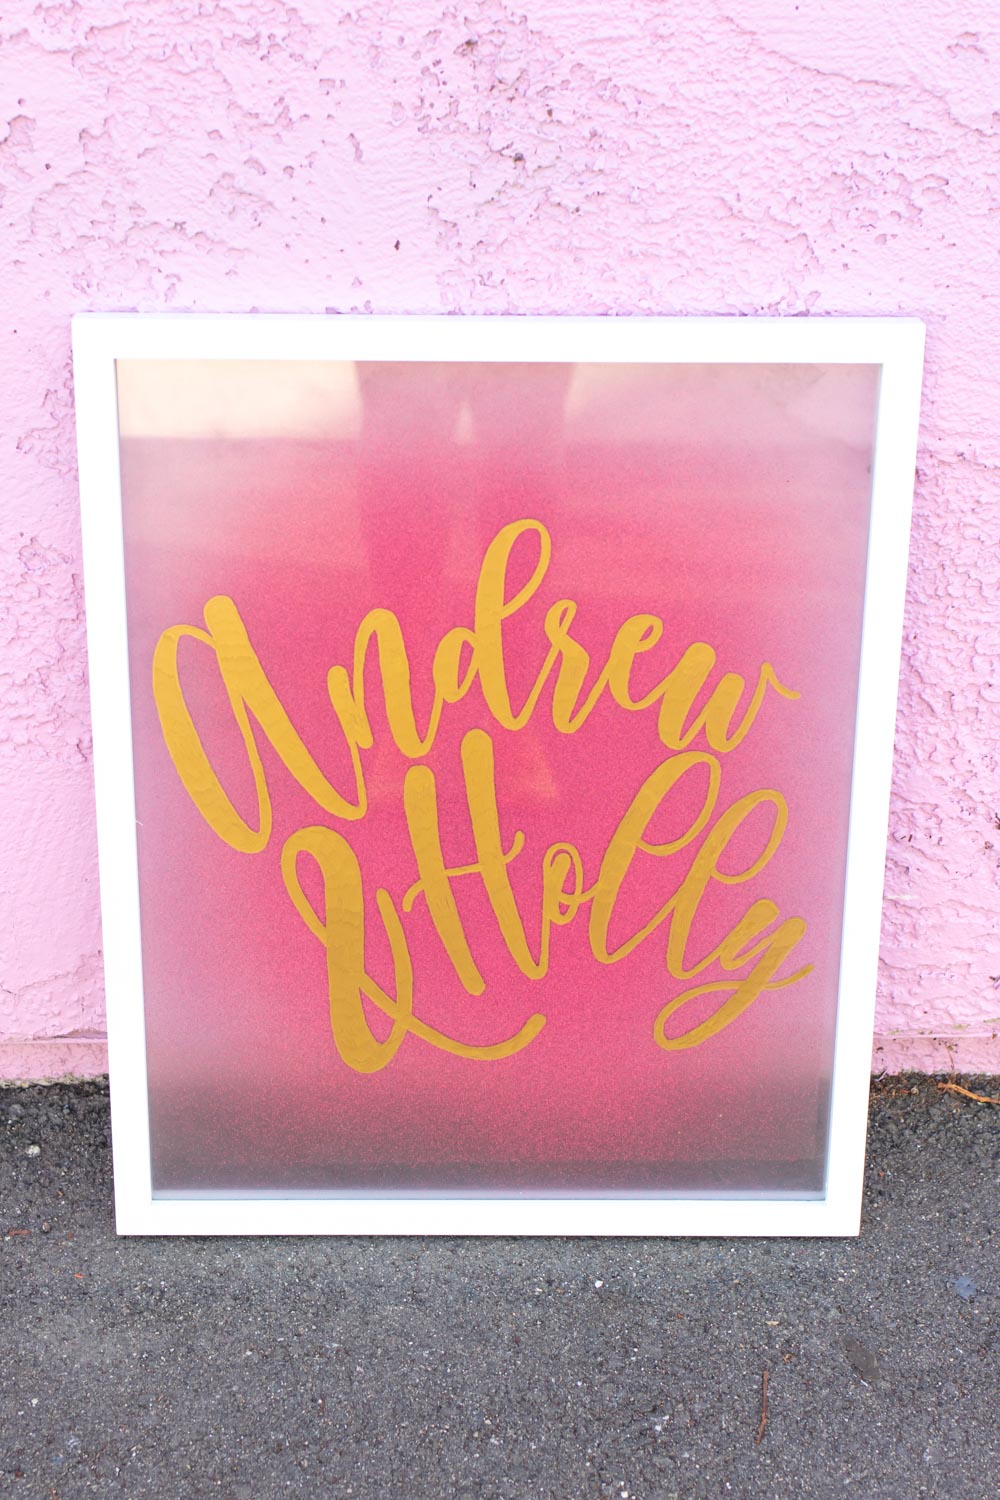 Easy DIY Calligraphy Wedding Sign // Use a large photo frame to make your own custom wedding signage with Rust-Oleum spray paints! Trace your names or sayings, then let it pop off the glass with the new Imagine collection of glitter spray paint available at @joann! #ad #handmadewithjoann #weddingdiy #diywedding #weddingsign #spraypainting #calligraphy #diyideas #homedecor